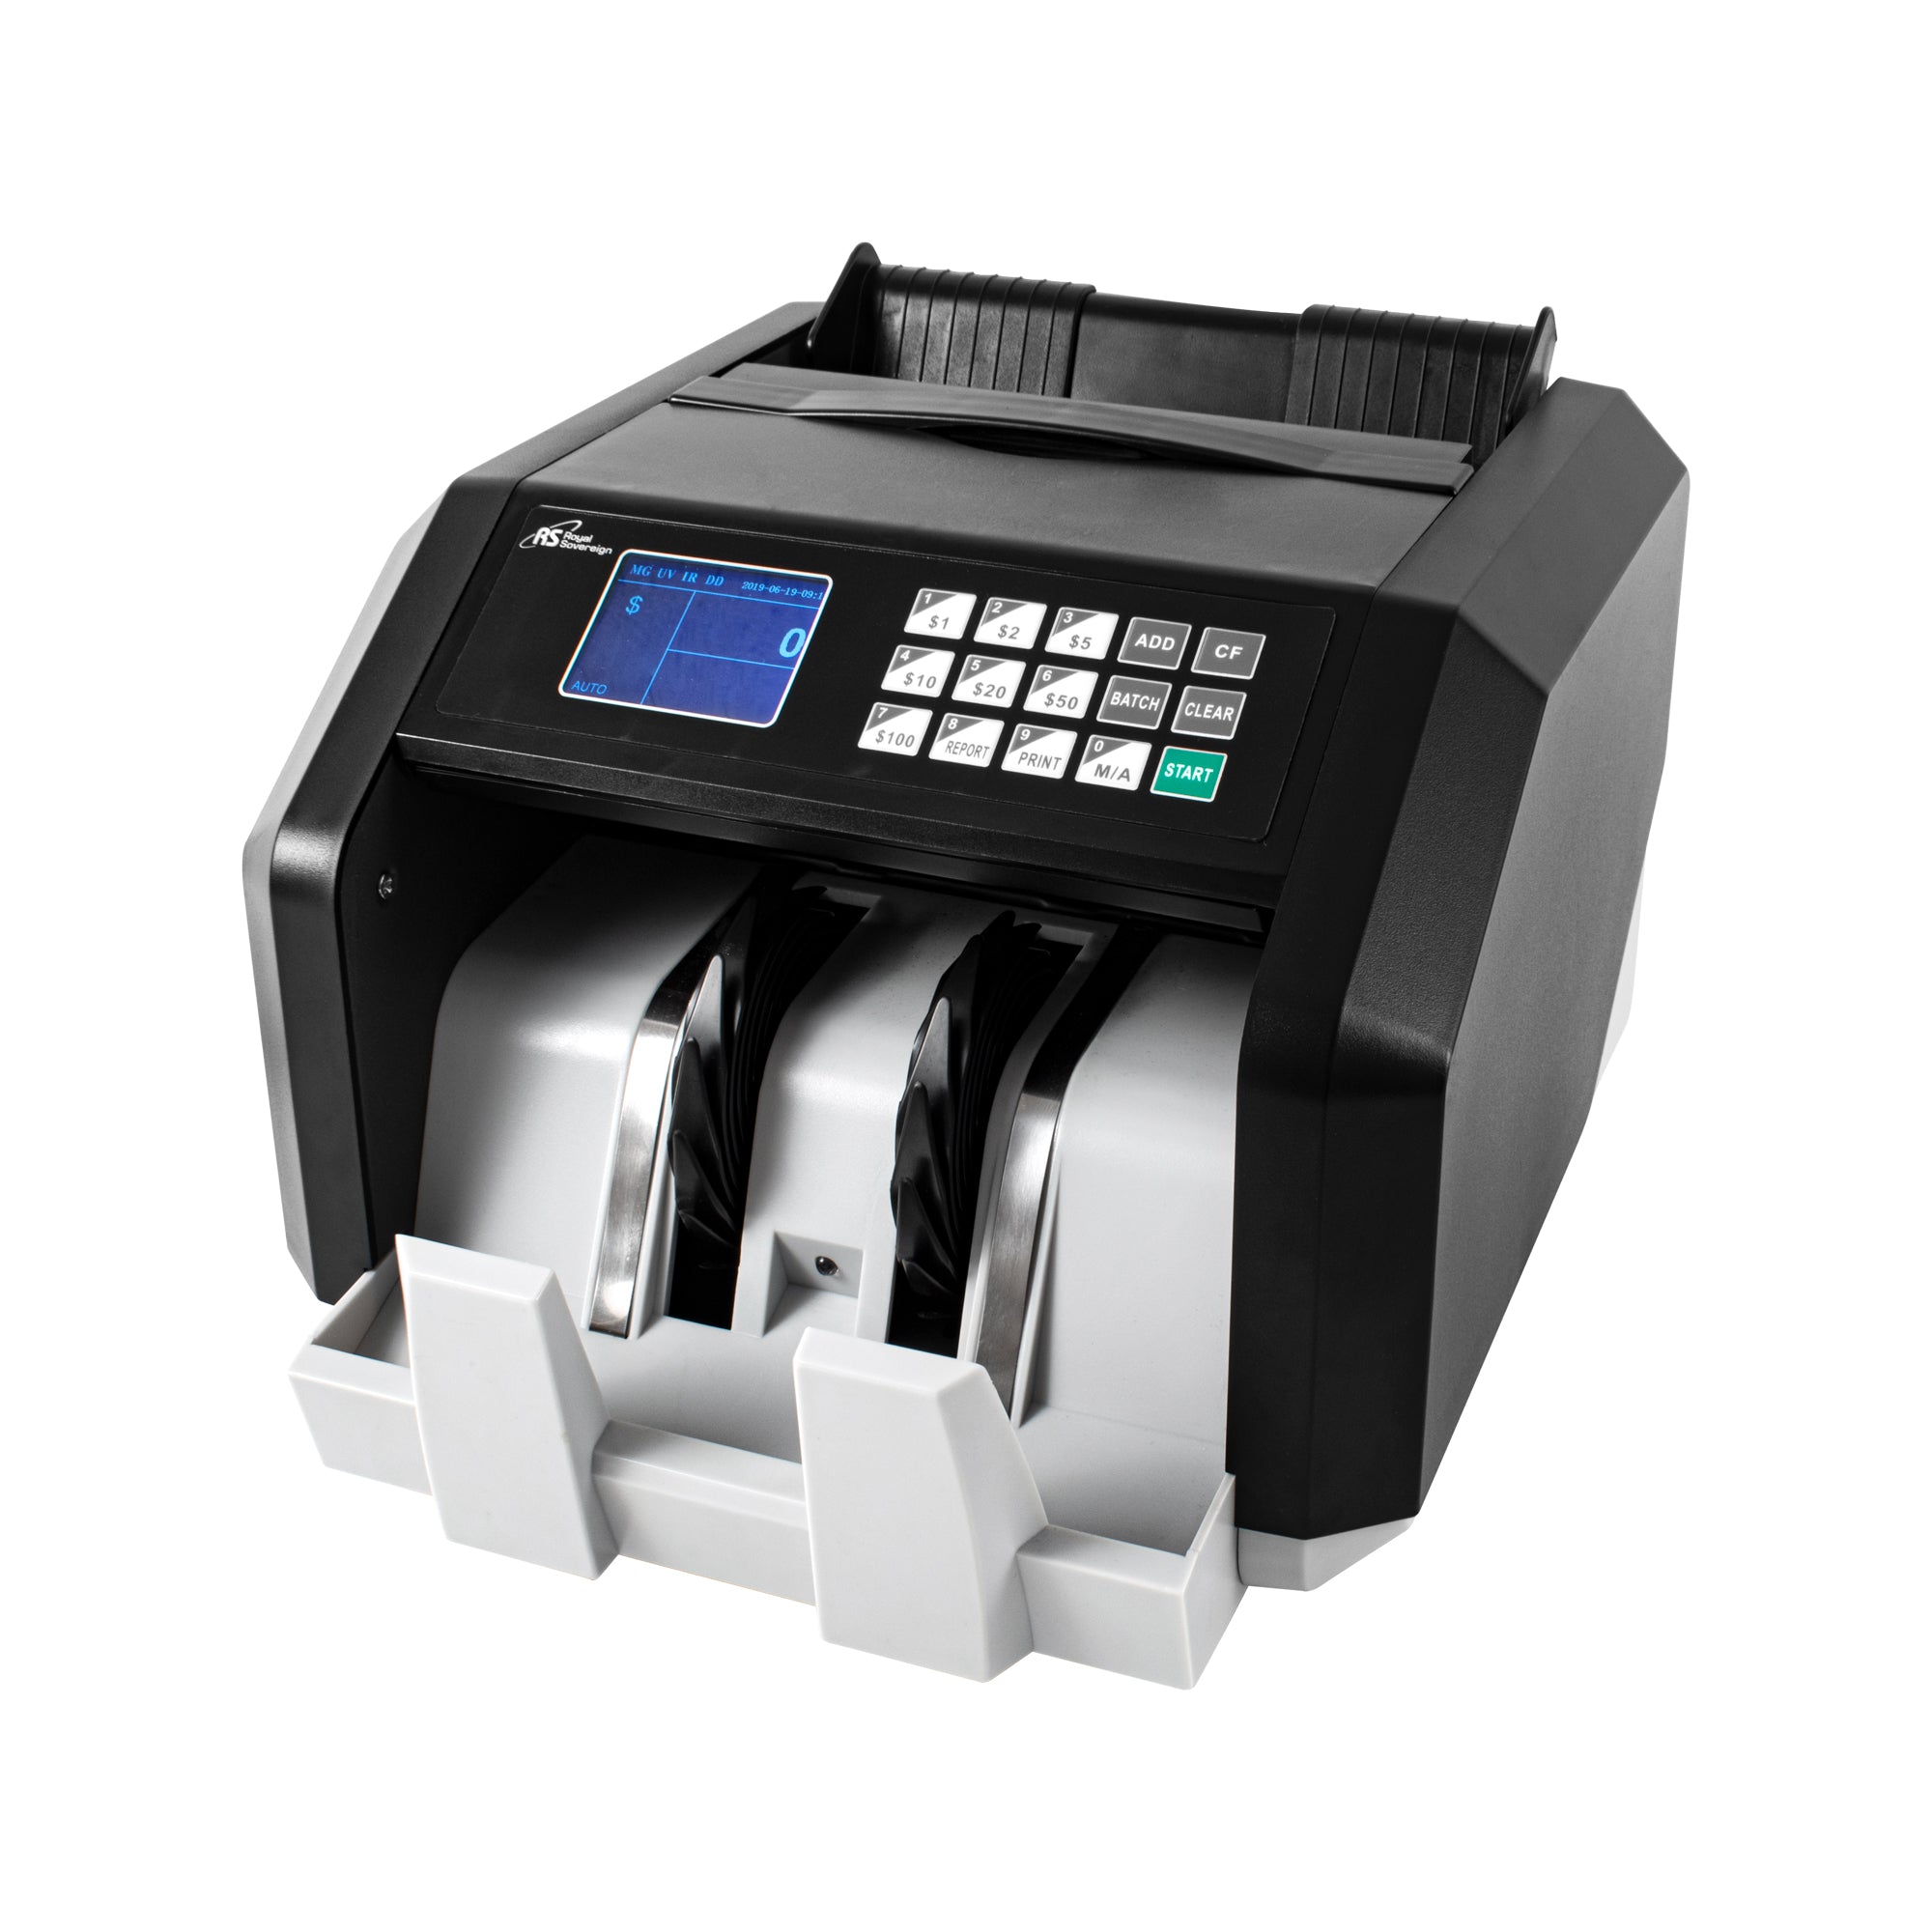 RBC-ES250, Bill Counter with Value Detection, Counterfeit Identification